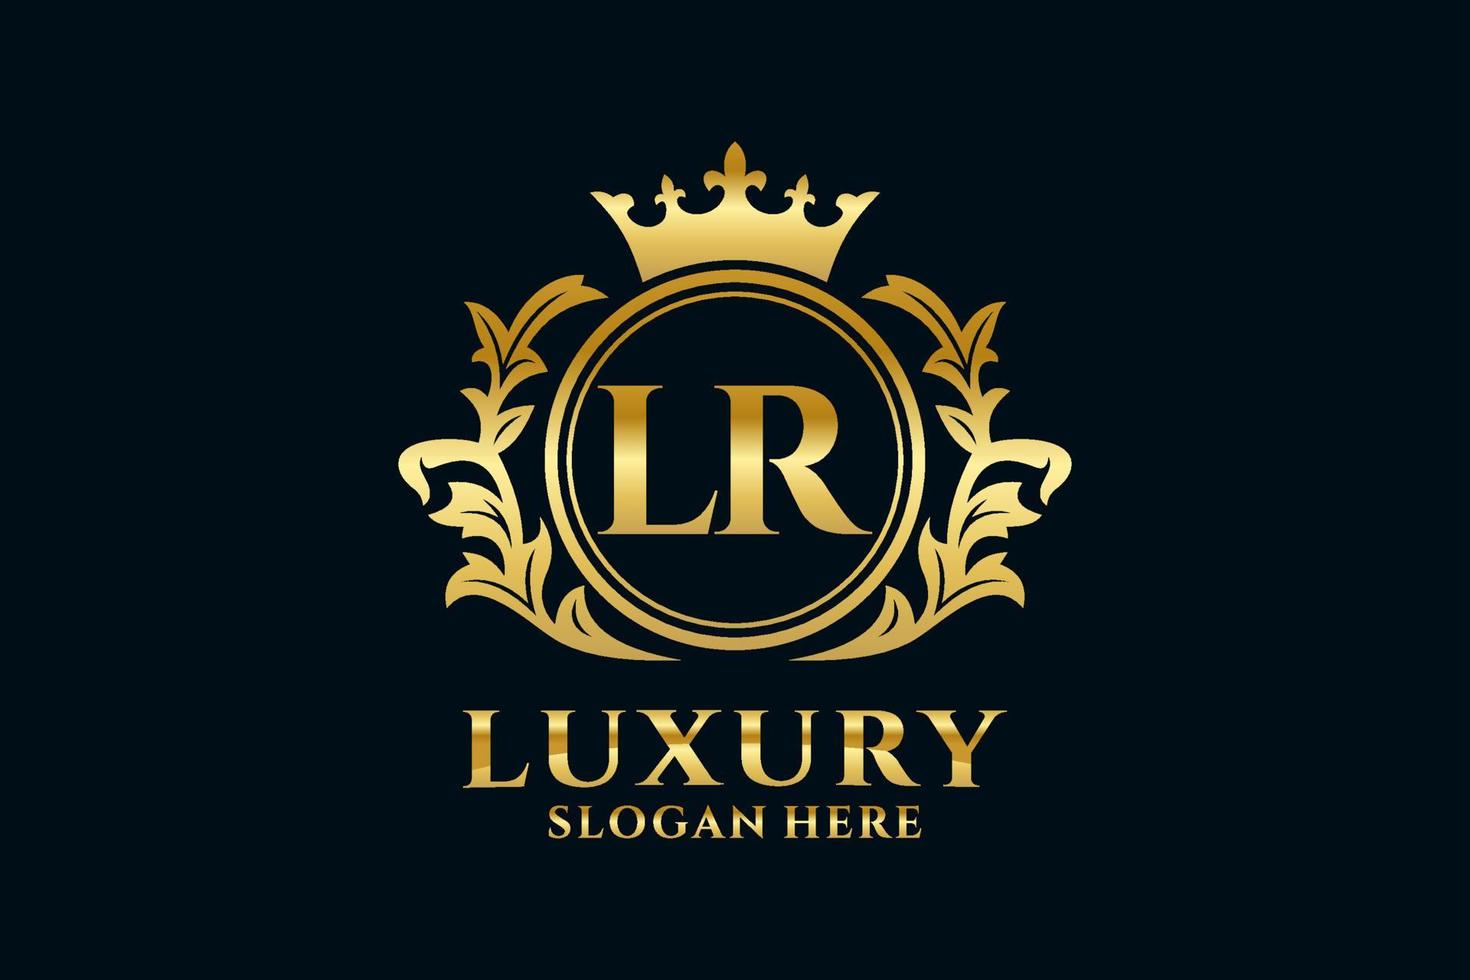 Initial LR Letter Royal Luxury Logo template in vector art for luxurious branding projects and other vector illustration.